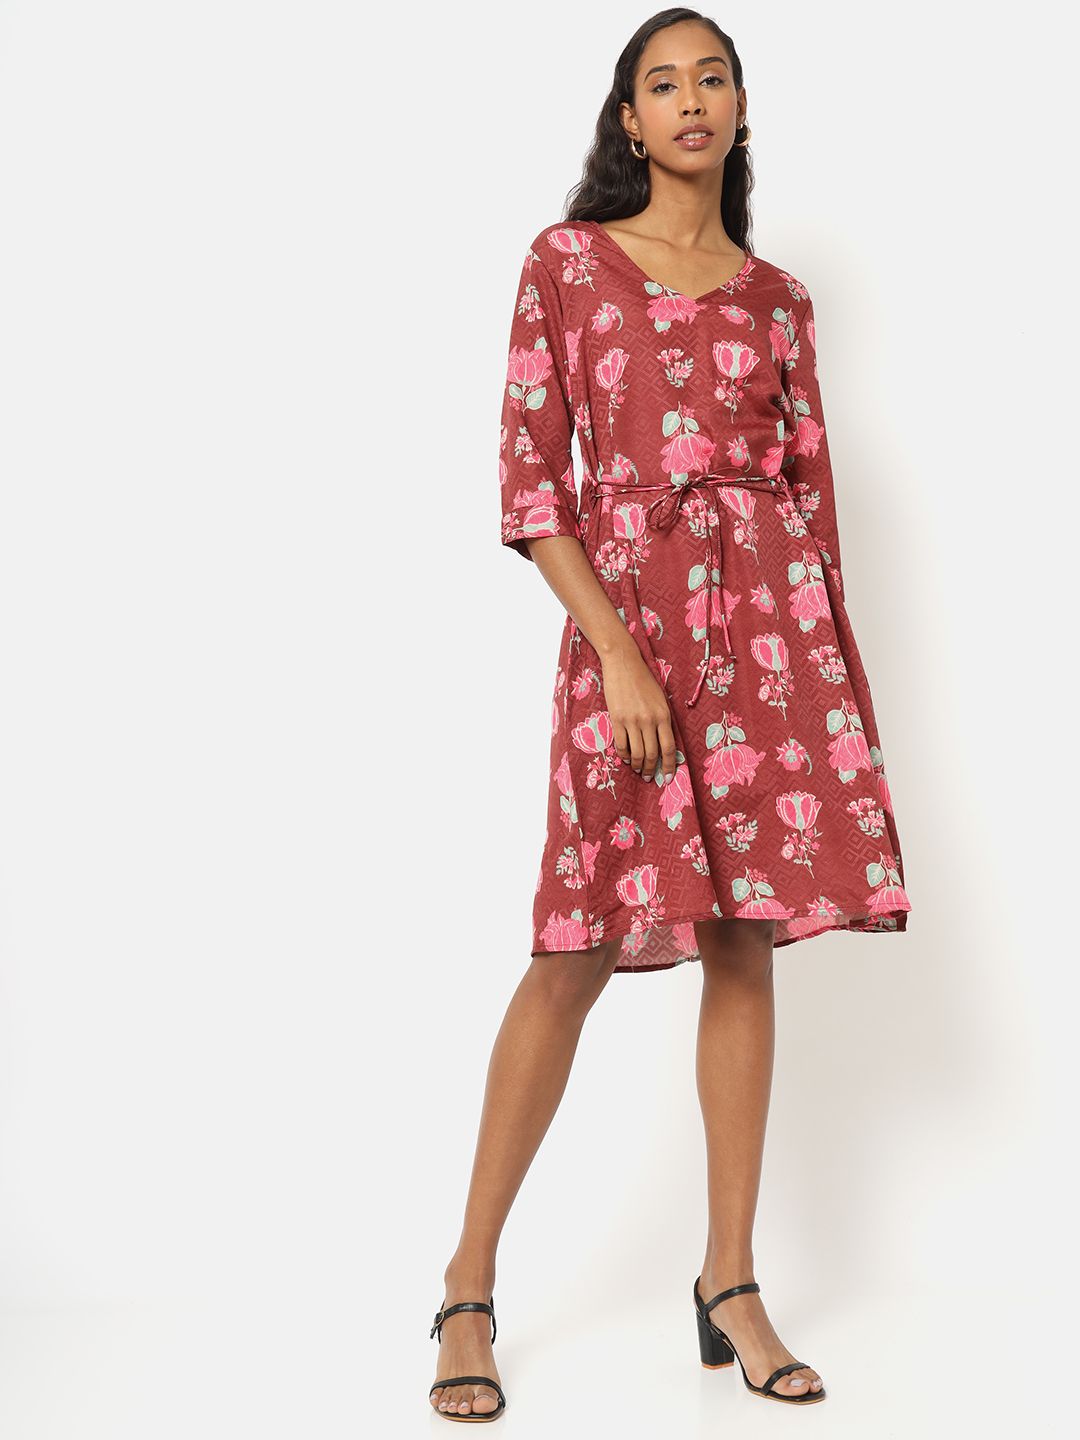 Saaki Peach-Coloured & Pink Floral Dress Price in India